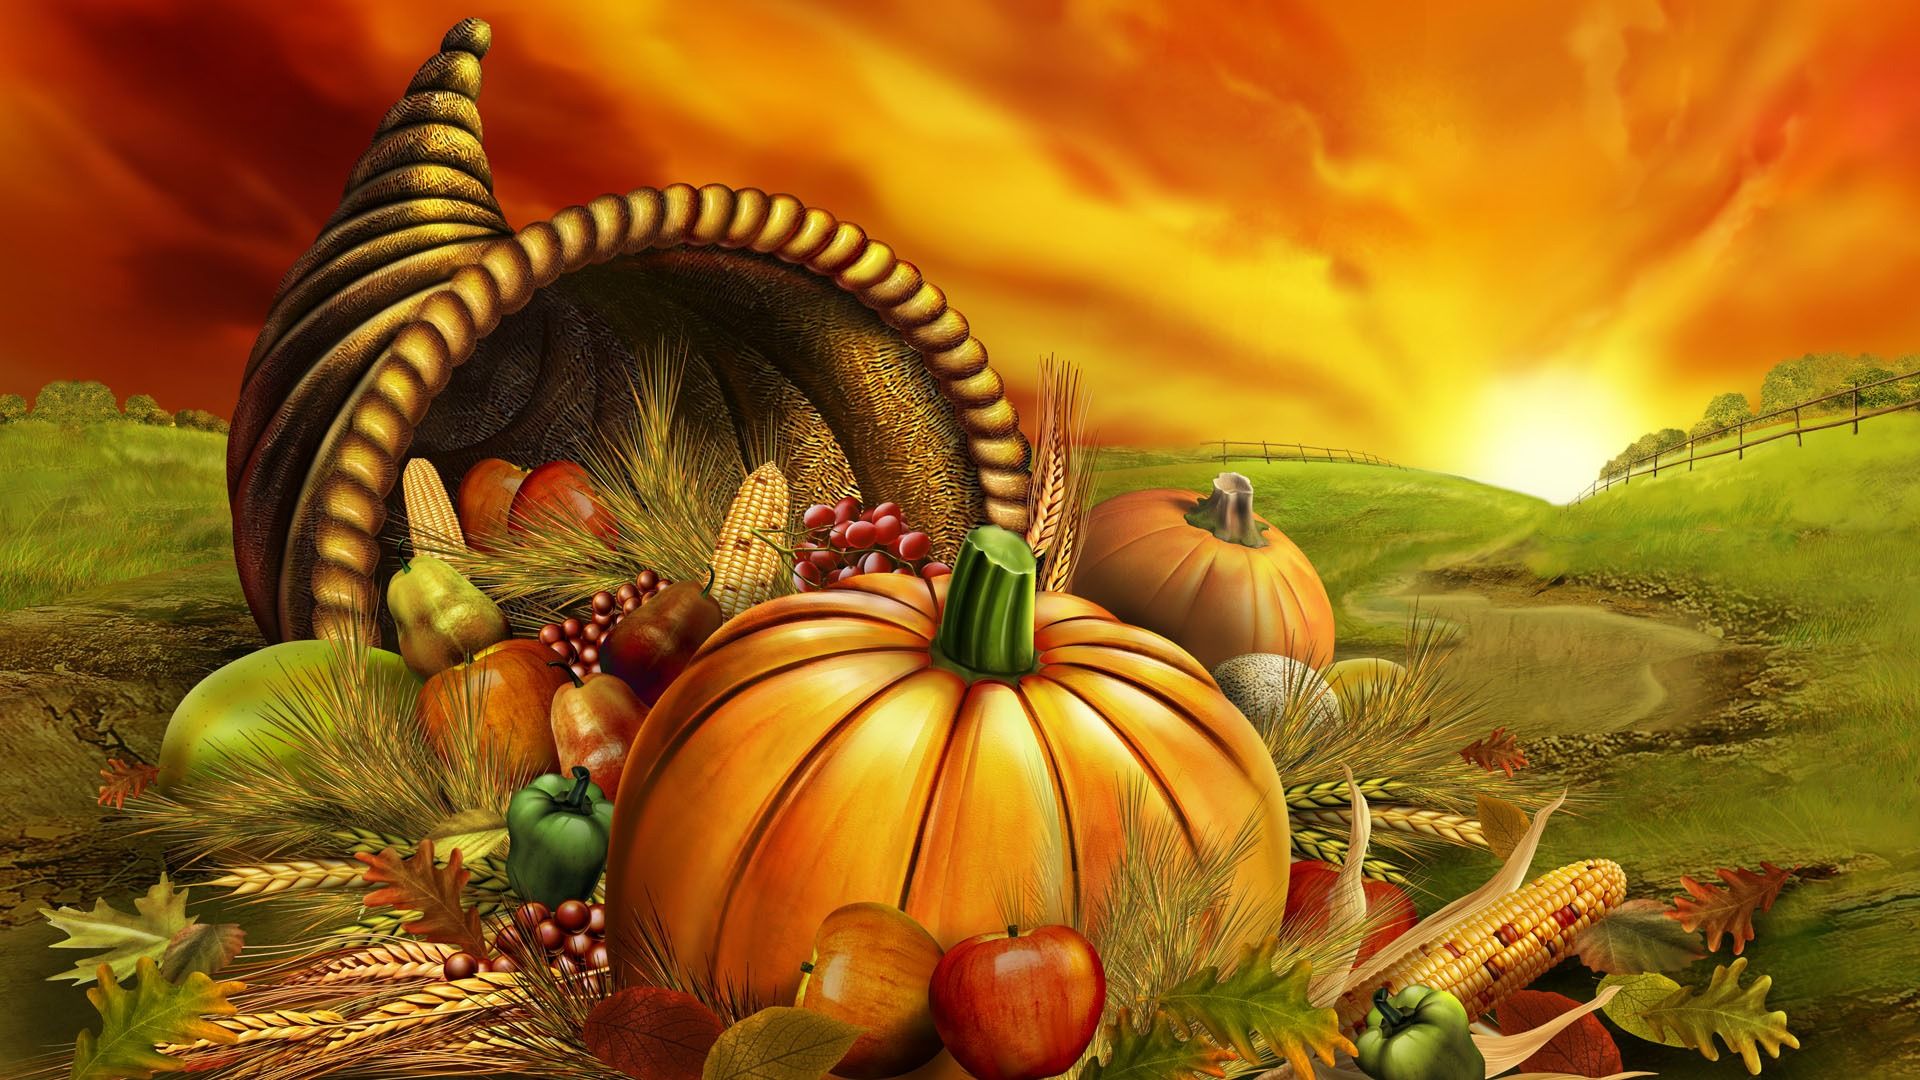 HD wallpaper, Pictures, Happy, Thanksgiving